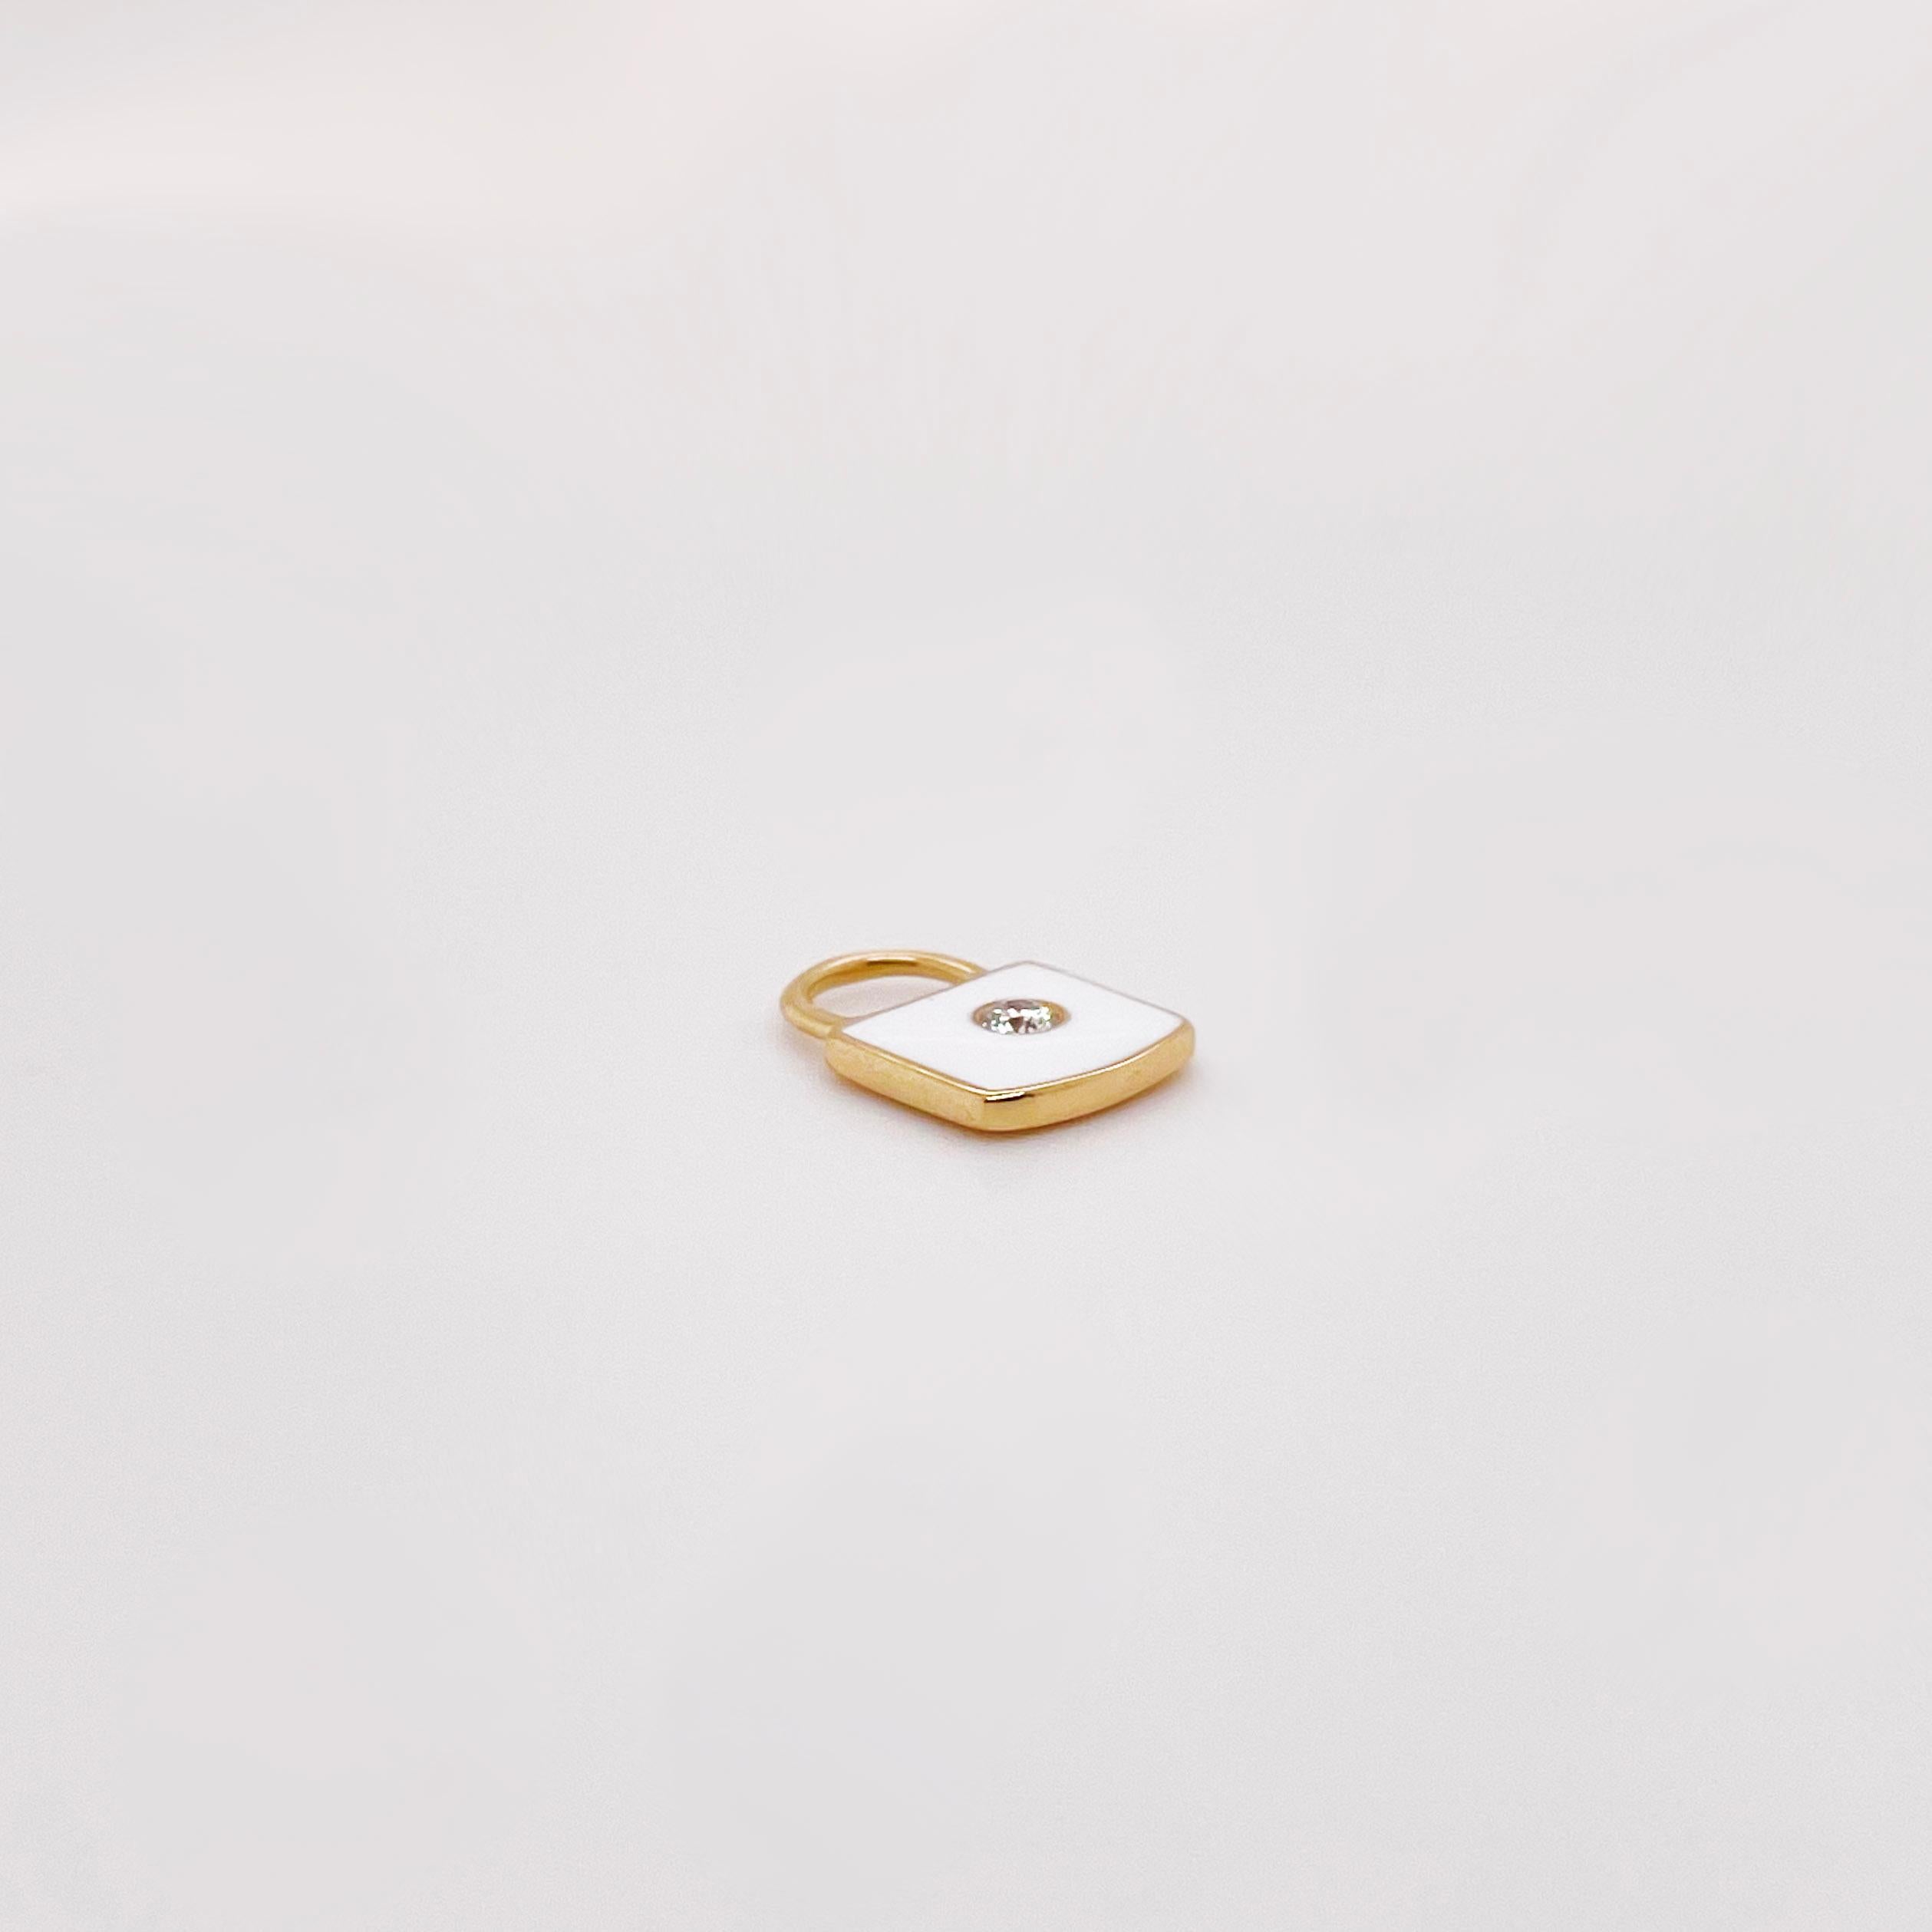 This Charm is perfect for a bracelet, a necklace, or even to add as decoration to your key ring! Its padlock design is one of the biggest styles of the year. The details for this beautiful charm are listed below:
Metal Quality: 14k Yellow Gold And